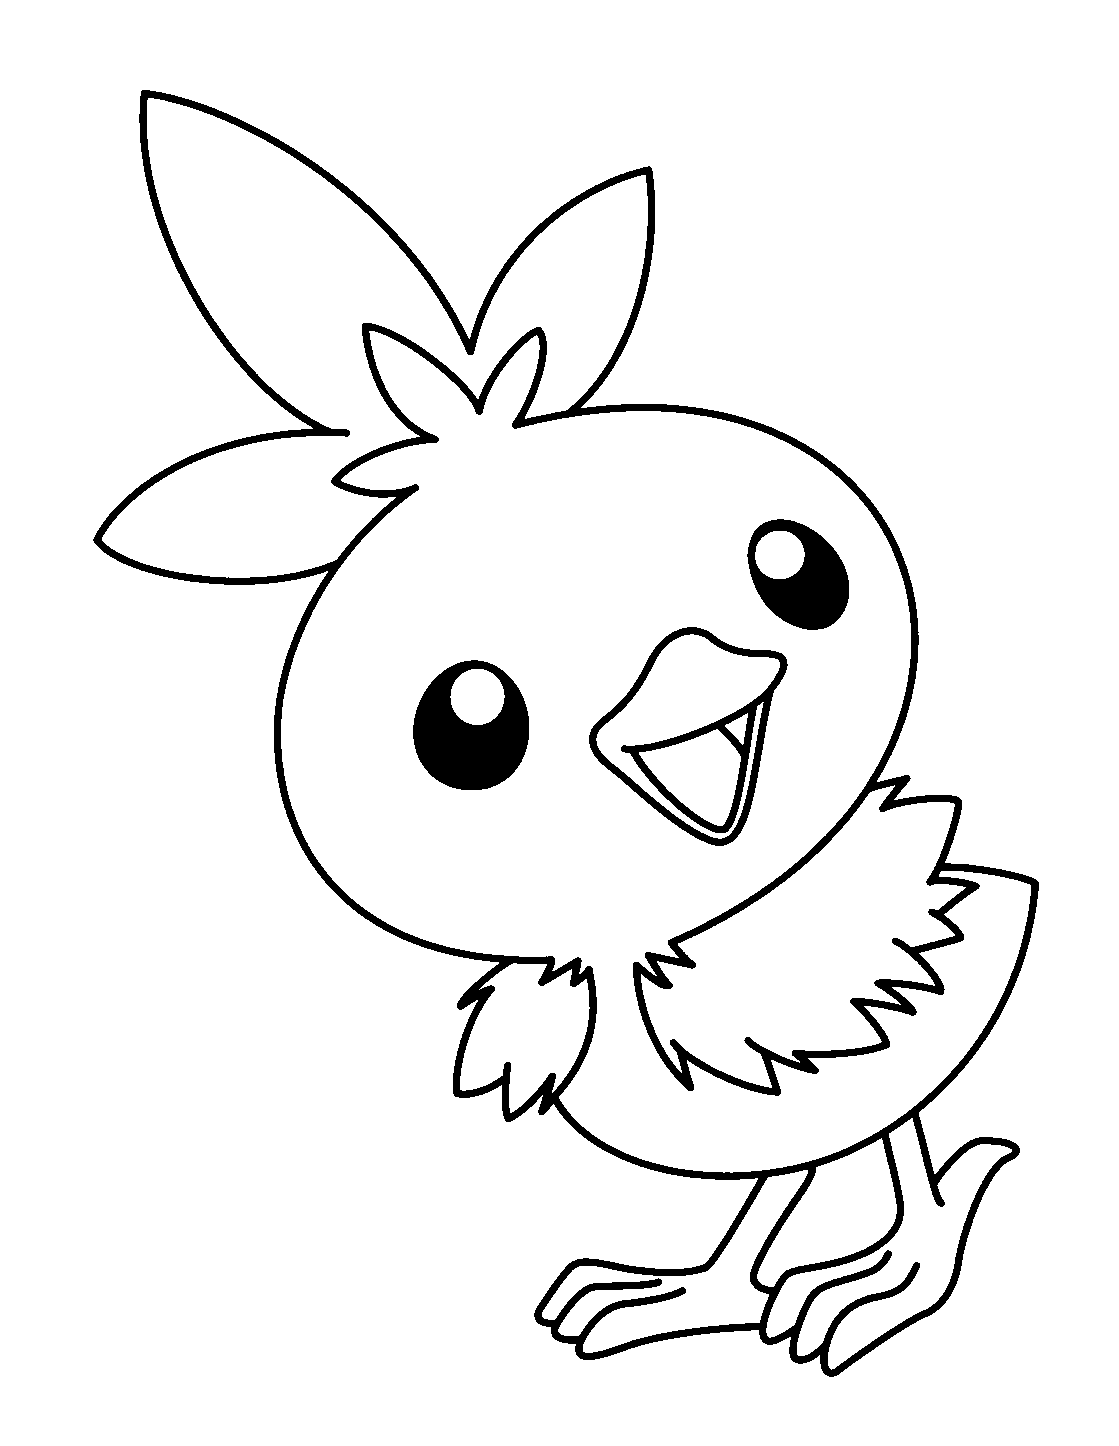 HD Torchic Picture Coloring Page - Free Printable Coloring Pages for Kids